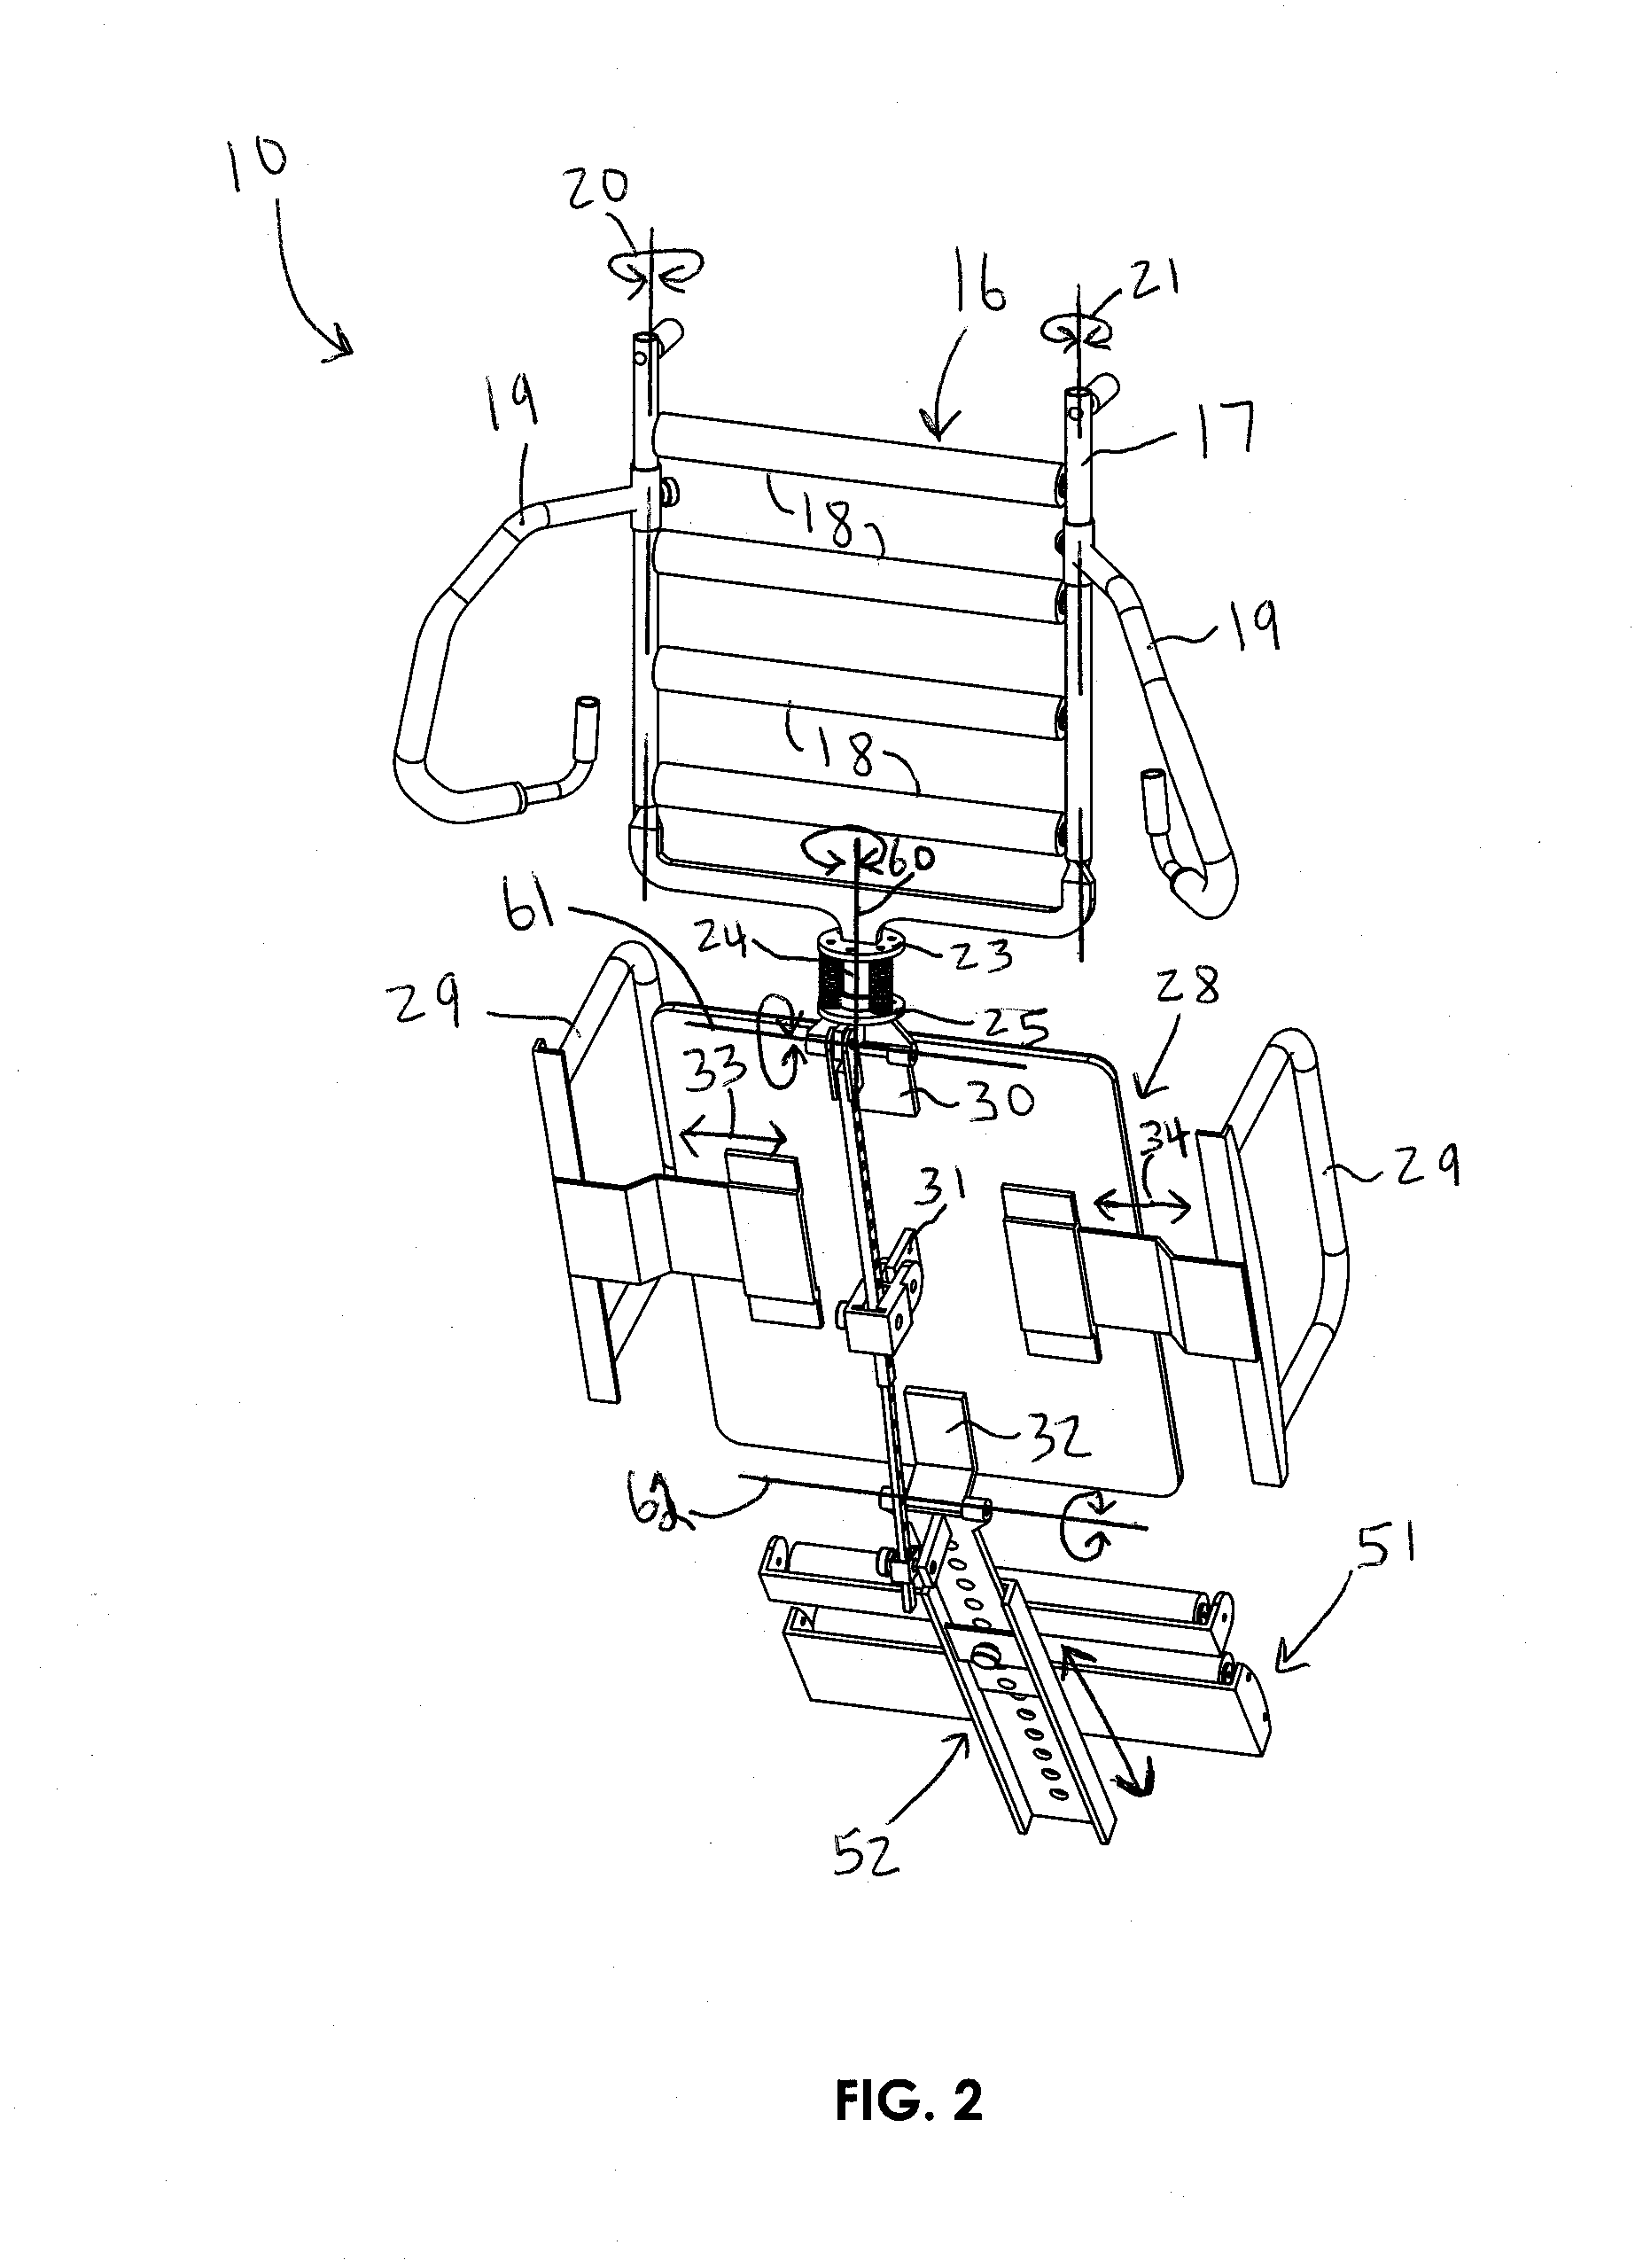 Multi-functional and collapsible exercise device and associated use thereof